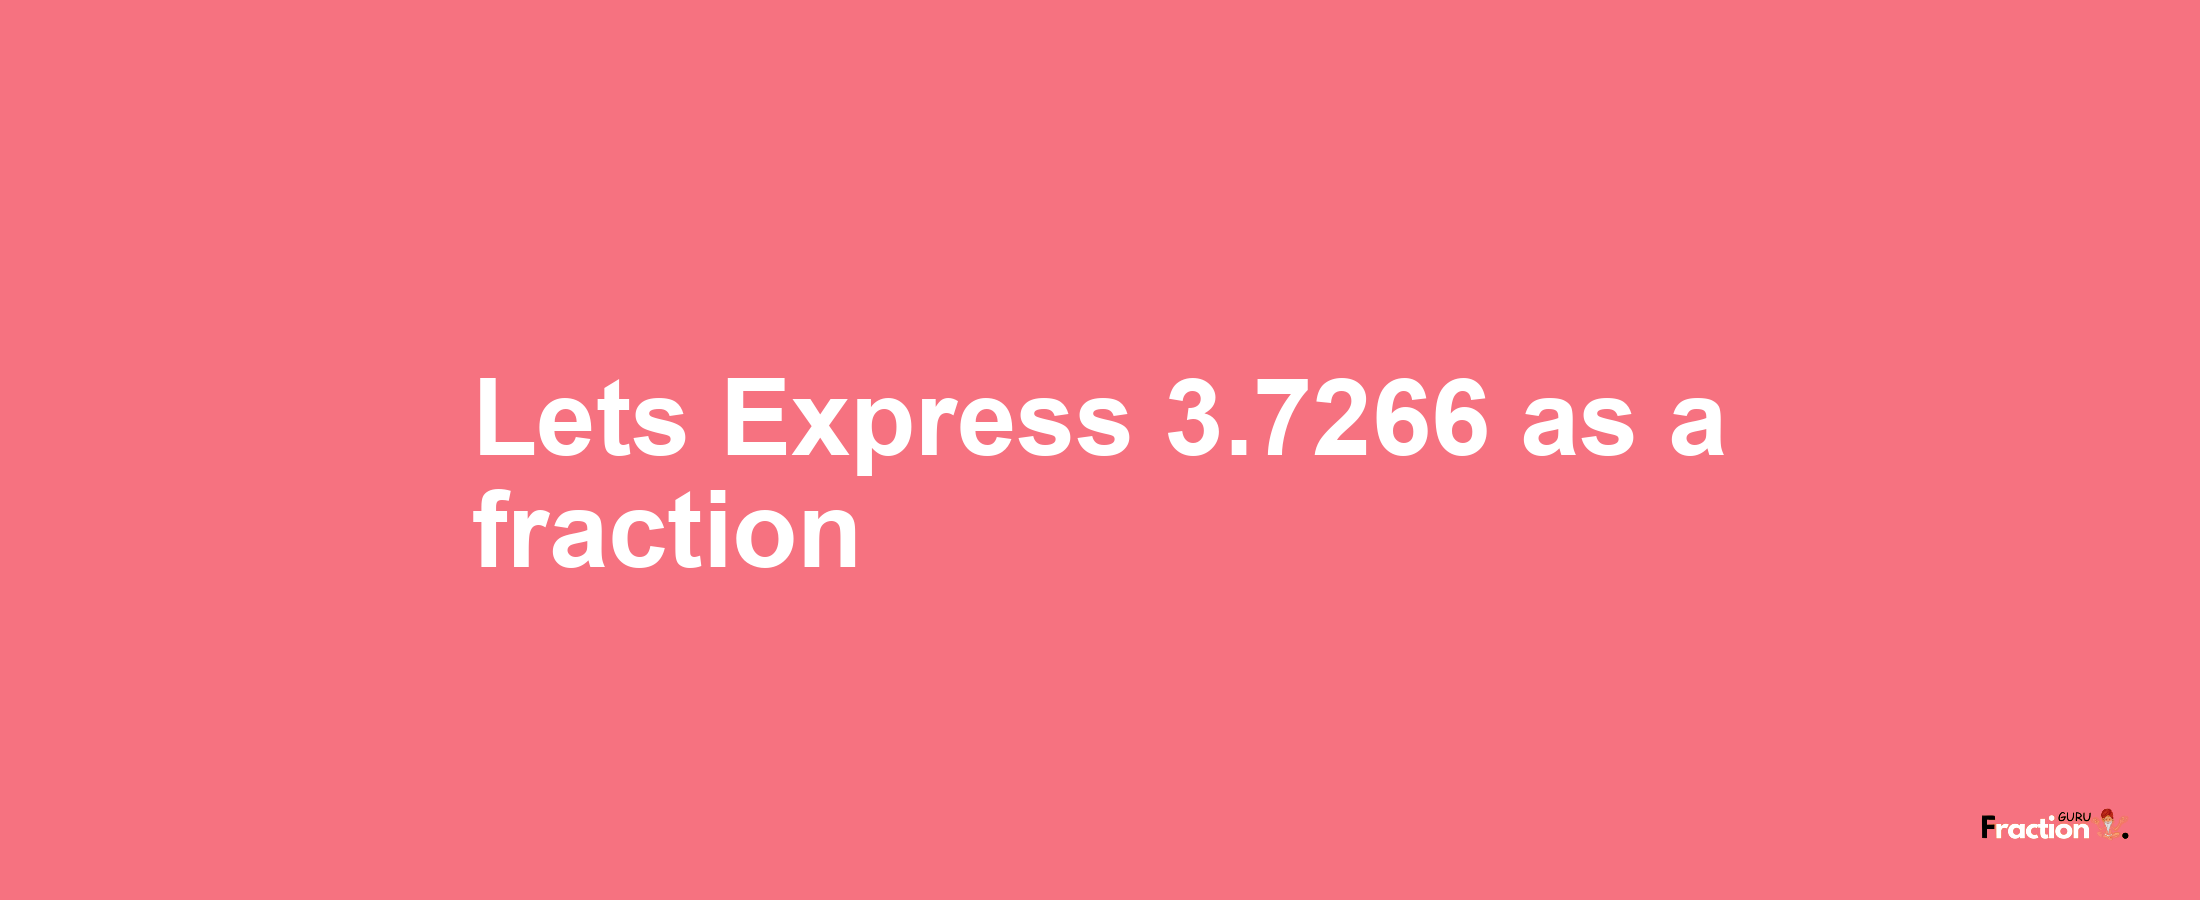 Lets Express 3.7266 as afraction